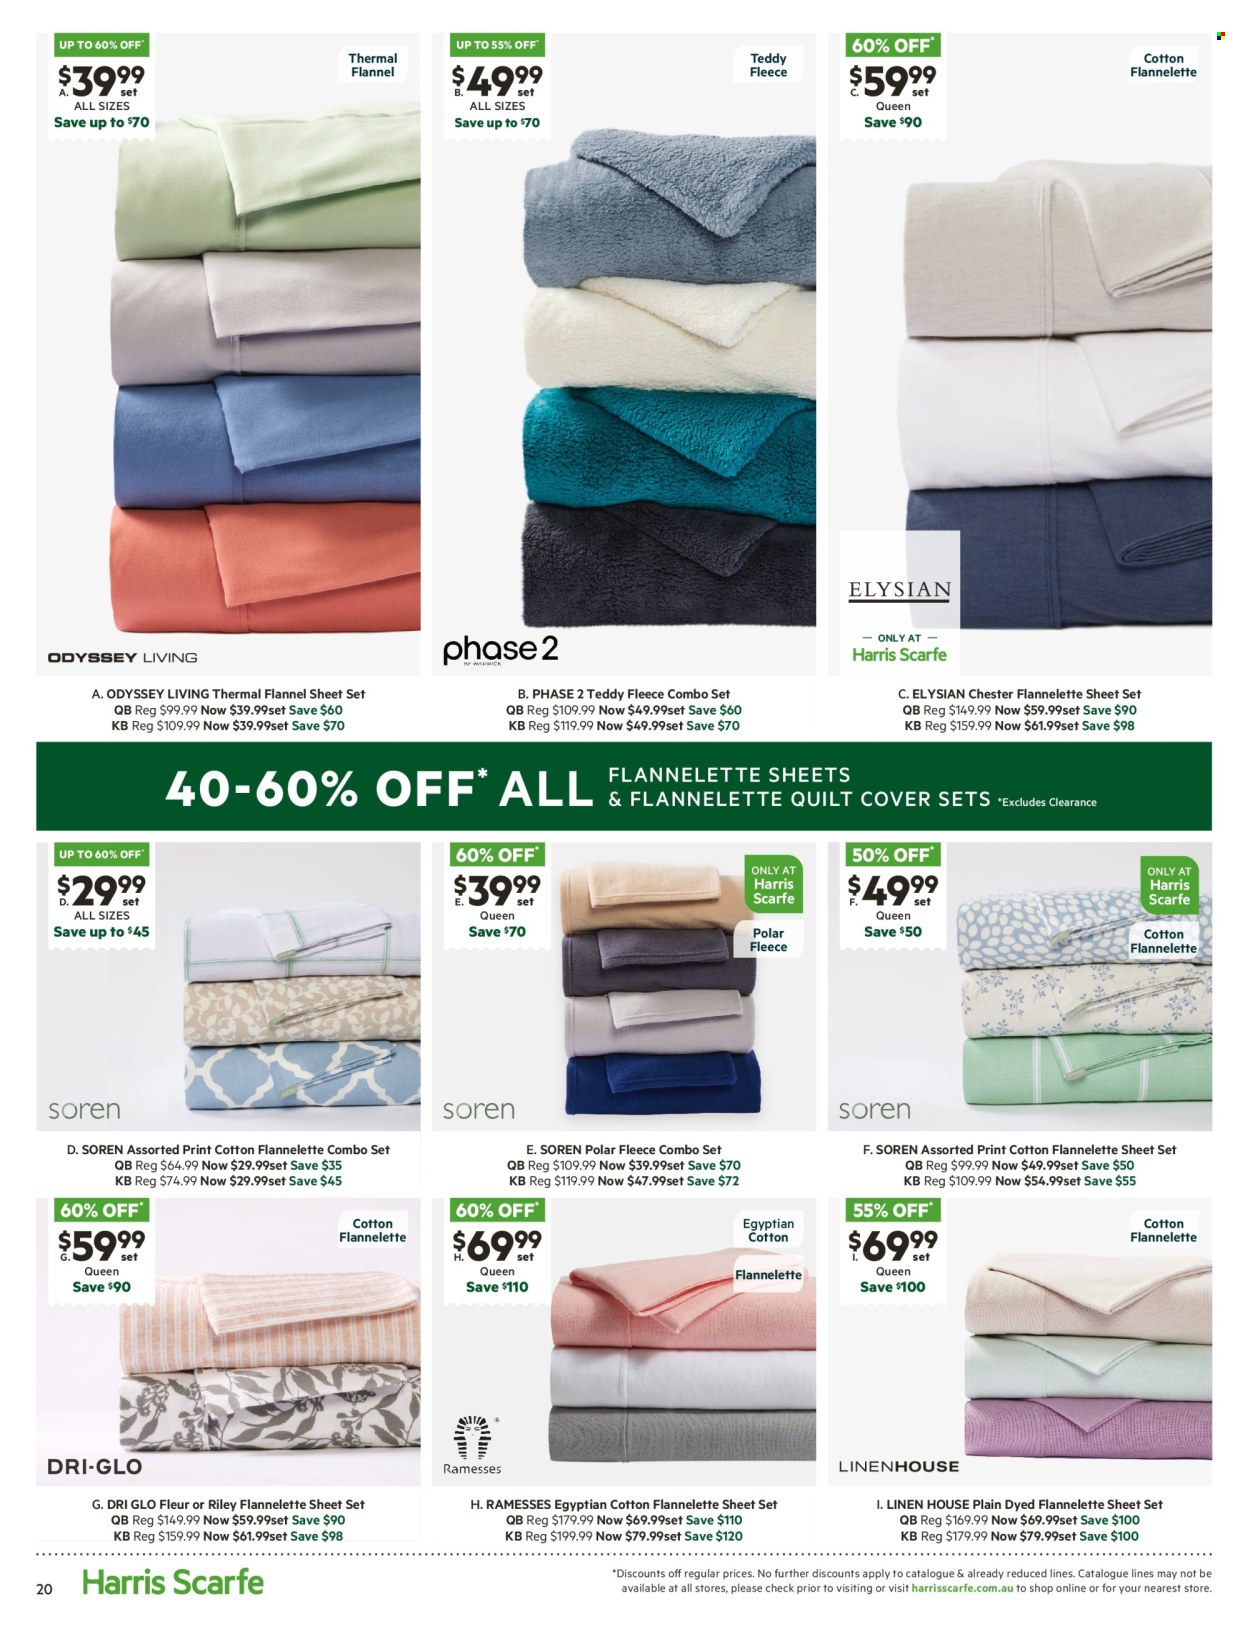 thumbnail - Harris Scarfe Catalogue - Sales products - bedding, linens, quilt, flannelette sheets. Page 20.